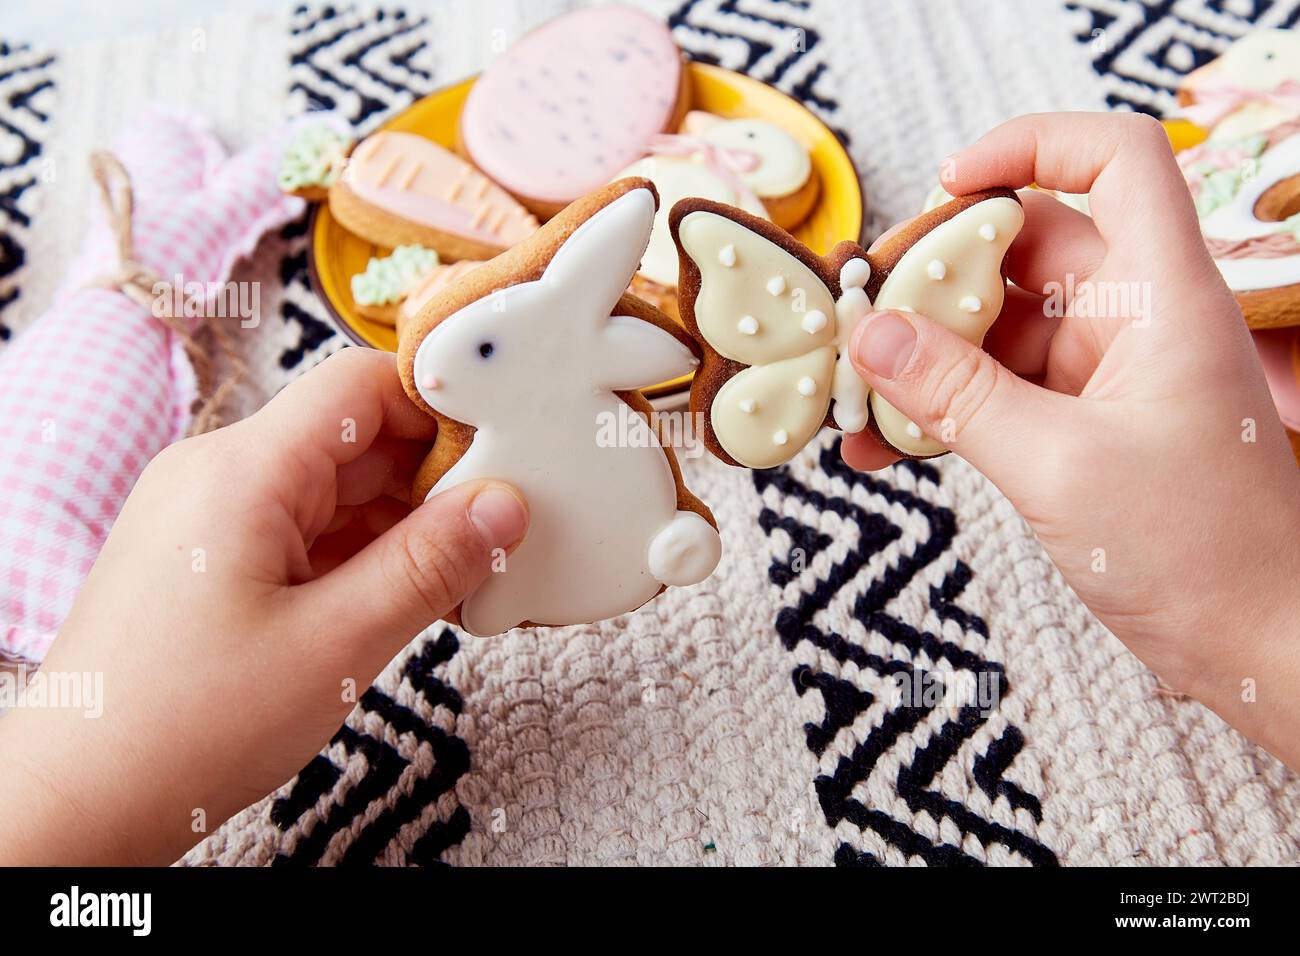 Background of happy Easter traditions is formed by the childs hands holding Easter cookies Stock Photo